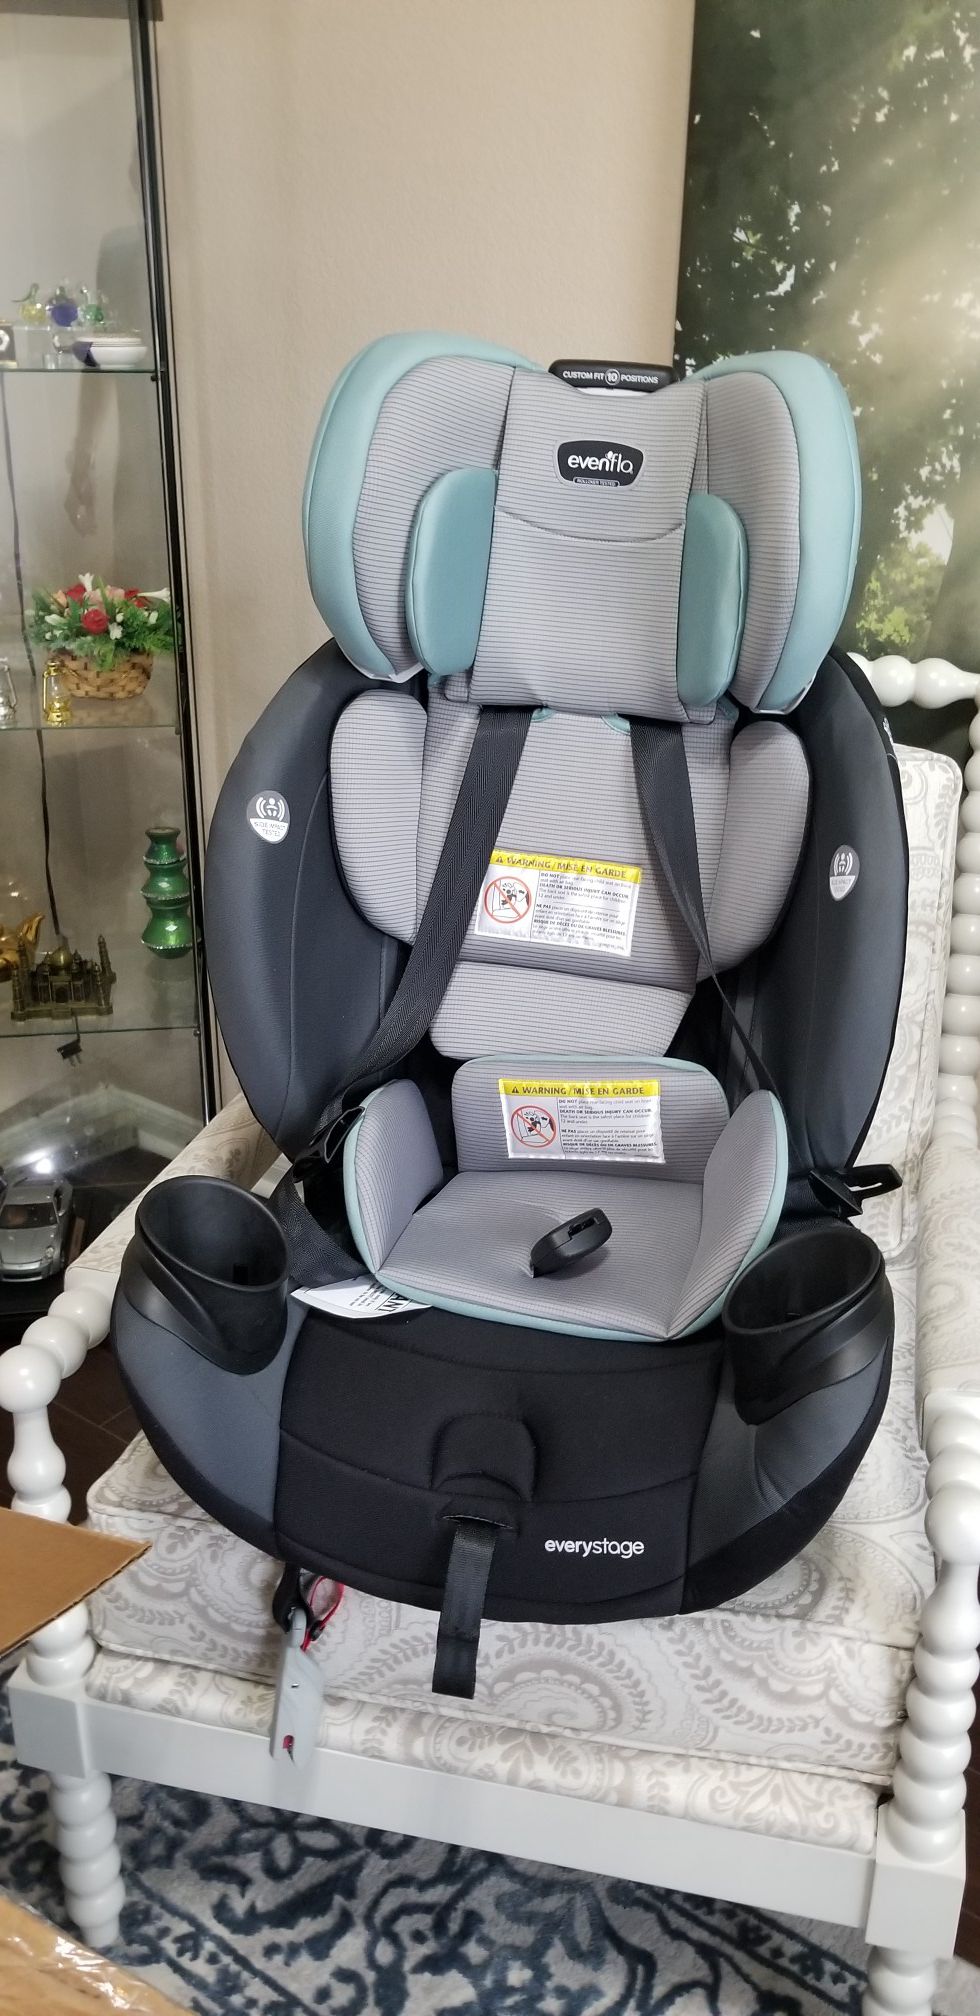 Evenflo EveryStage LX All-in-One Car Seat, Convertible Baby Seat BRAND NEW